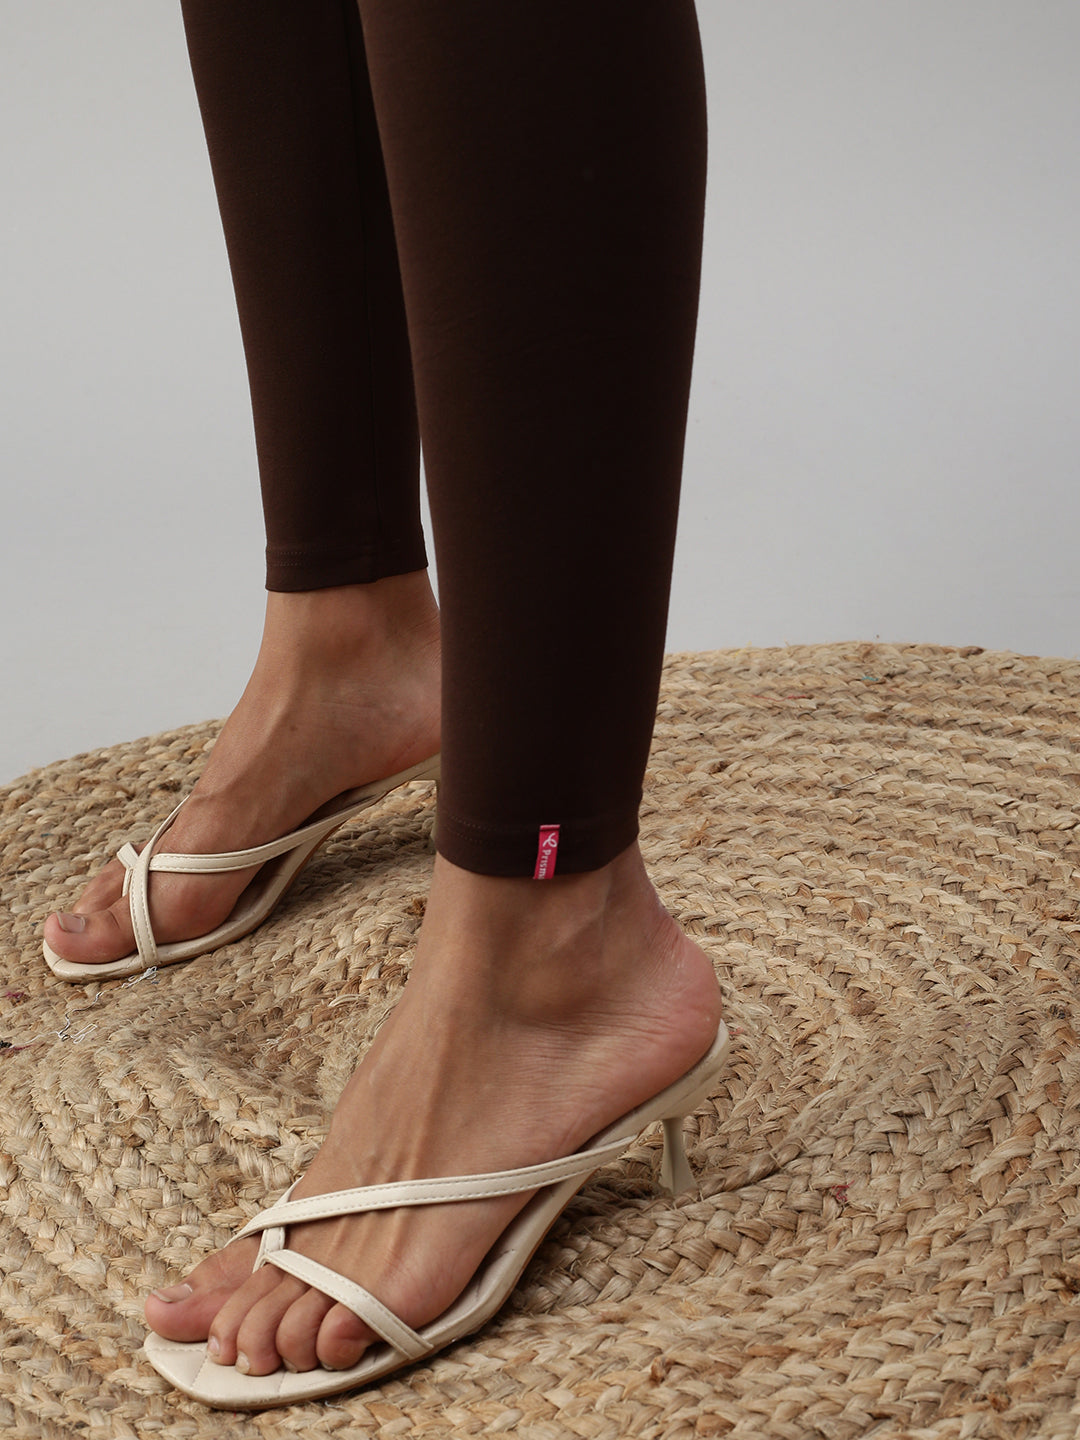 Shop Prisma's Brown Ankle Leggings for Comfortable Style